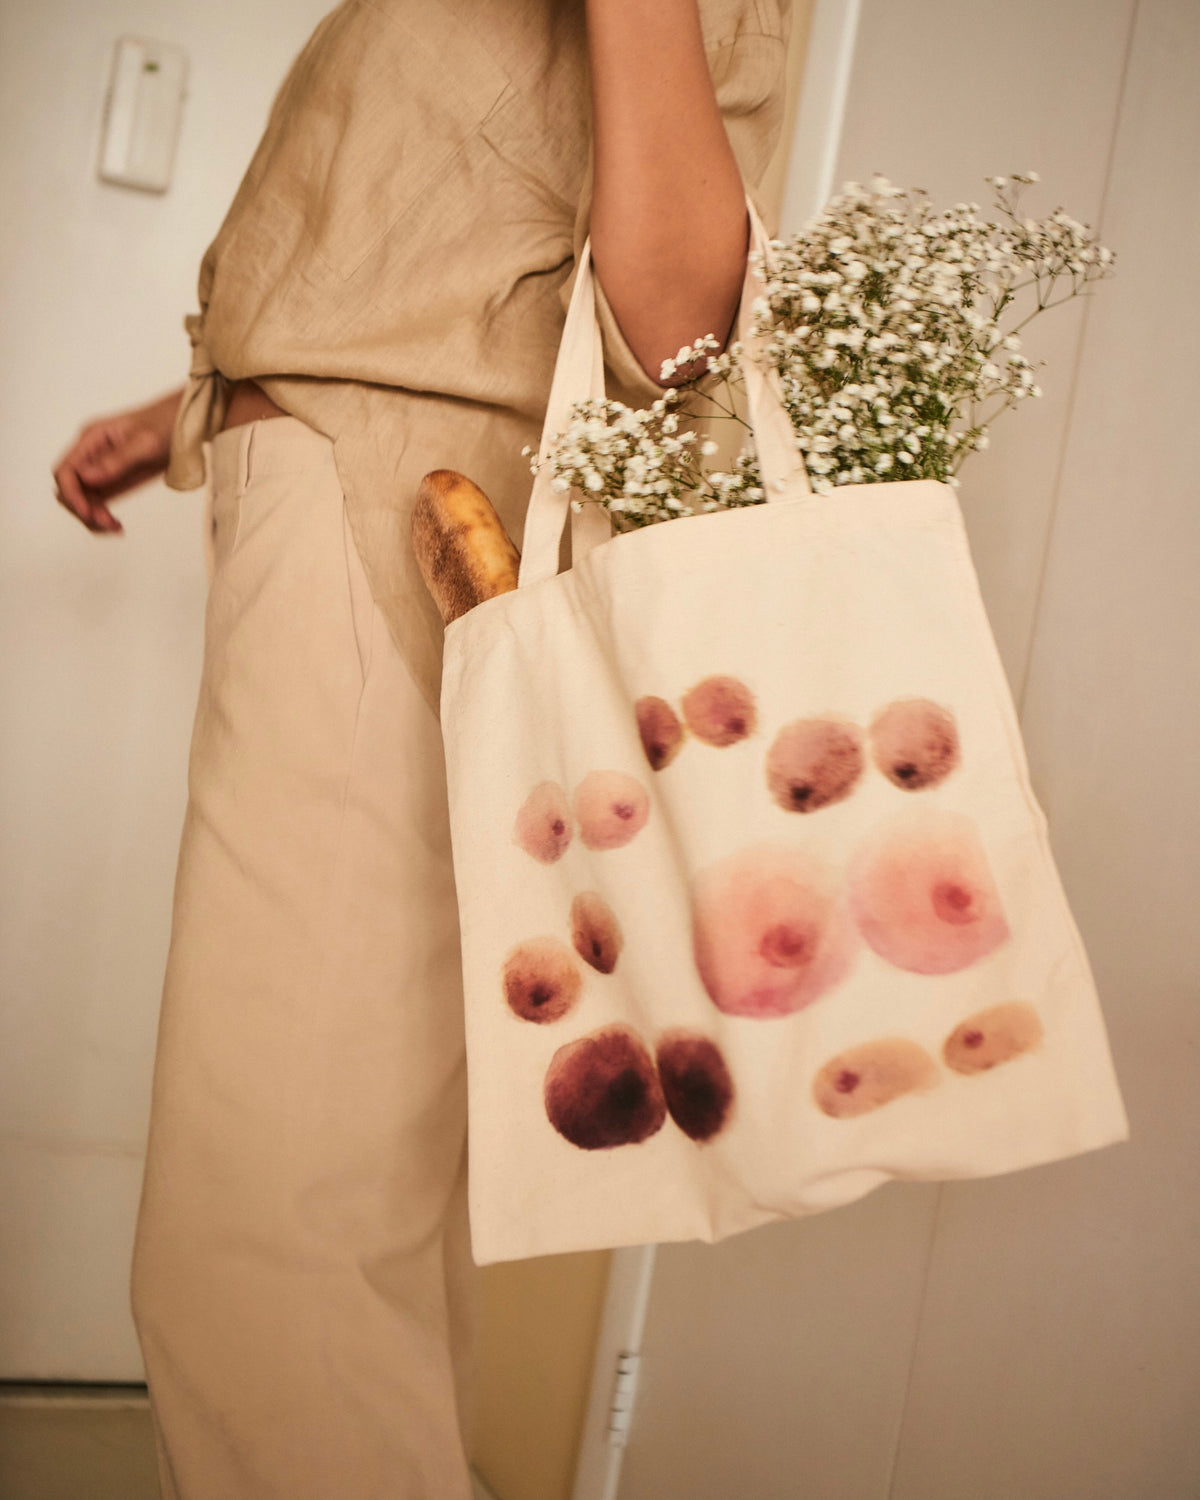 Woman holding Nuudii Boob Bag with flowers inside